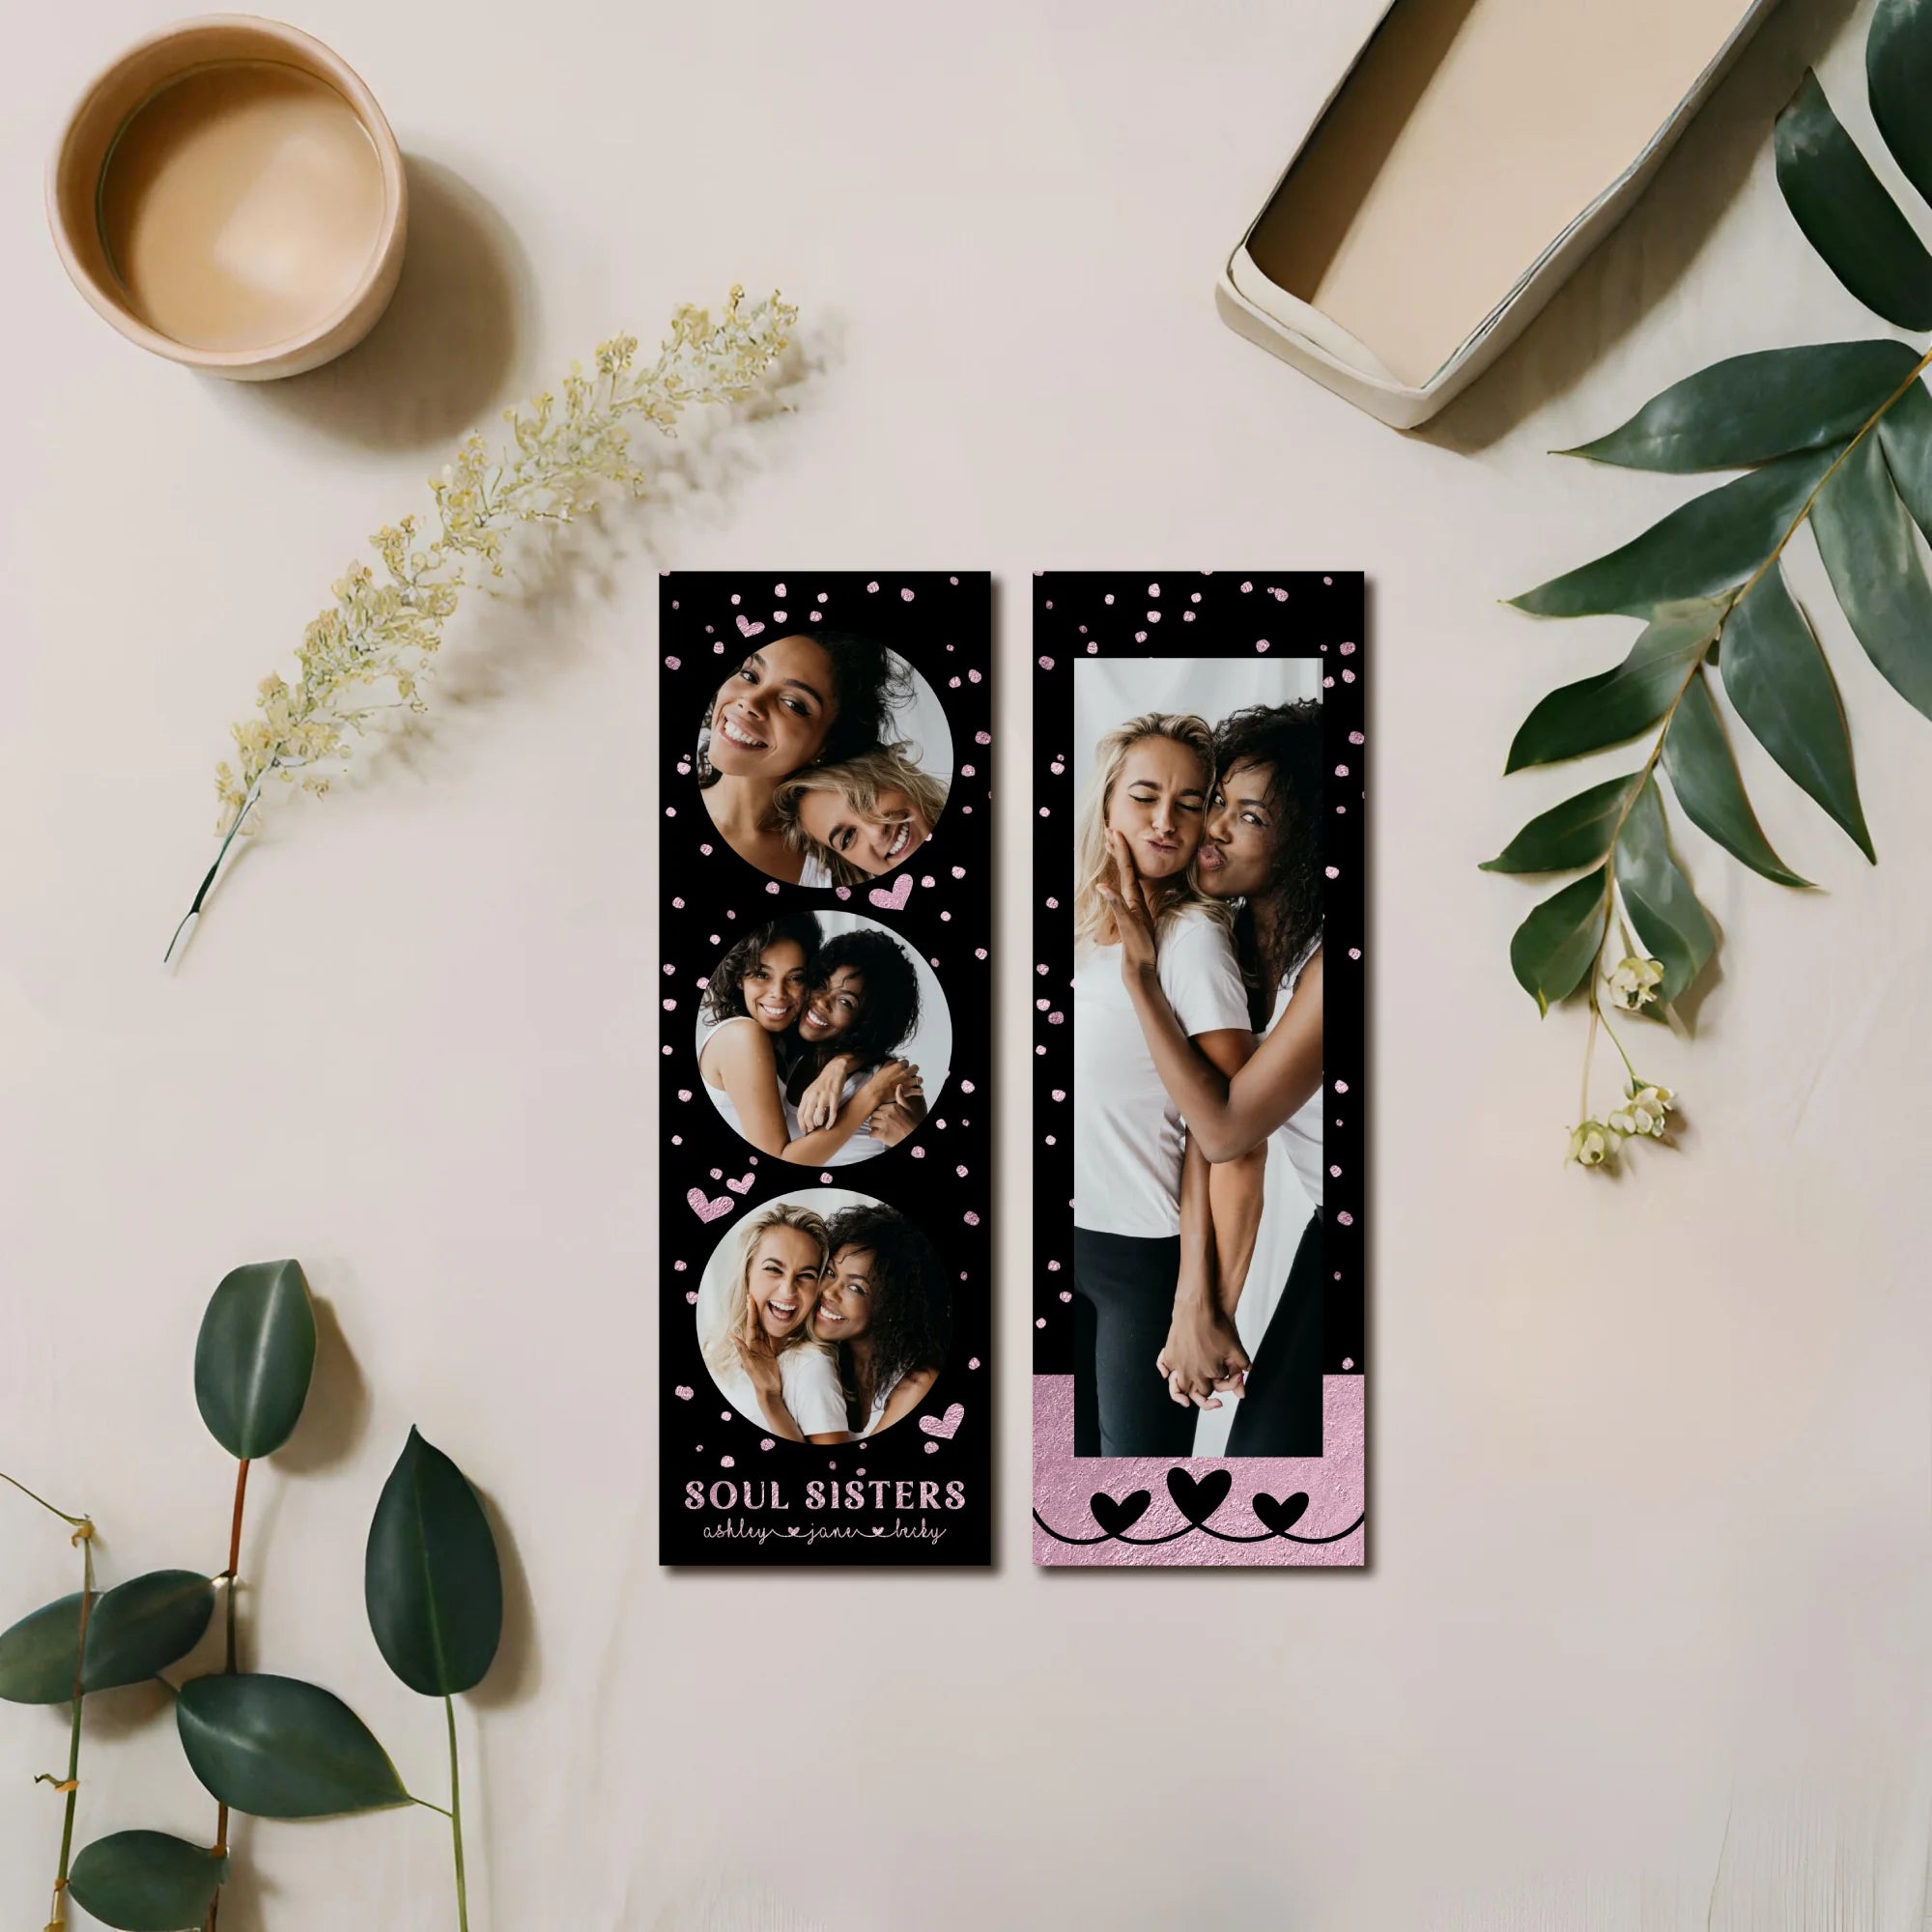 Editable Pink Glitter Soul Sisters Photo Bookmark Template DIY Gift by Playful Pixie Studio